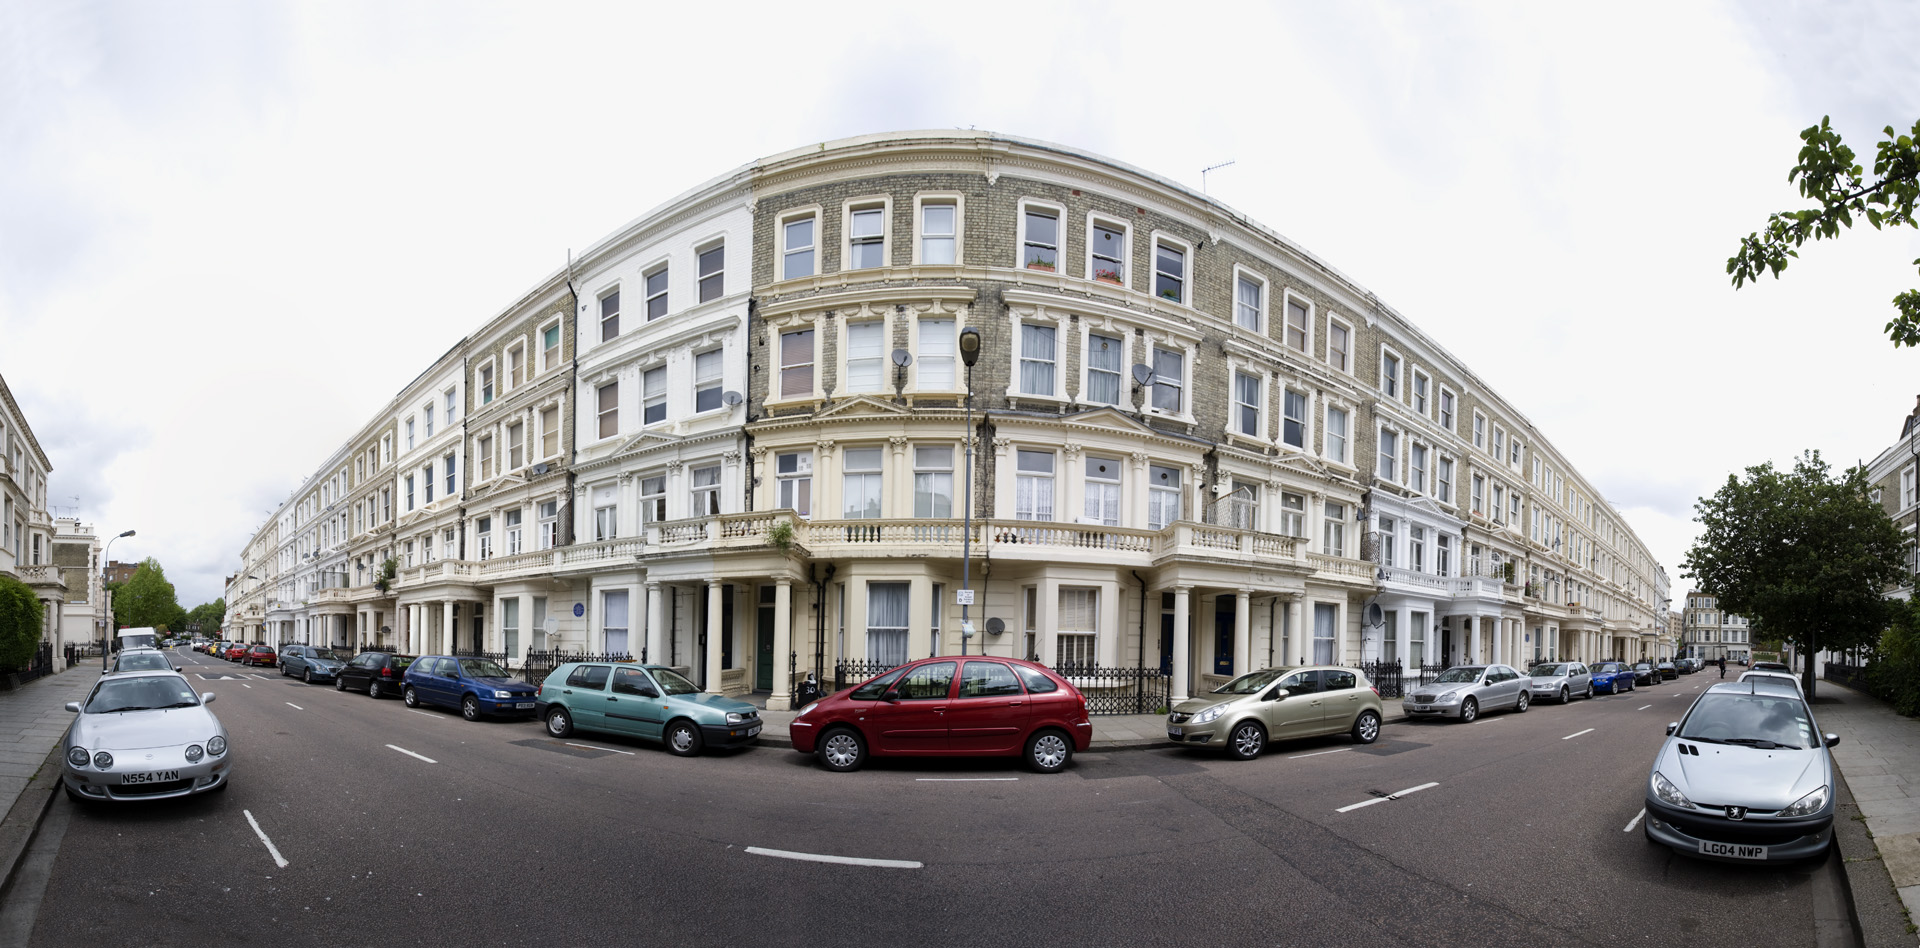 Composite panorama of the exterior of Barons Court apartments.